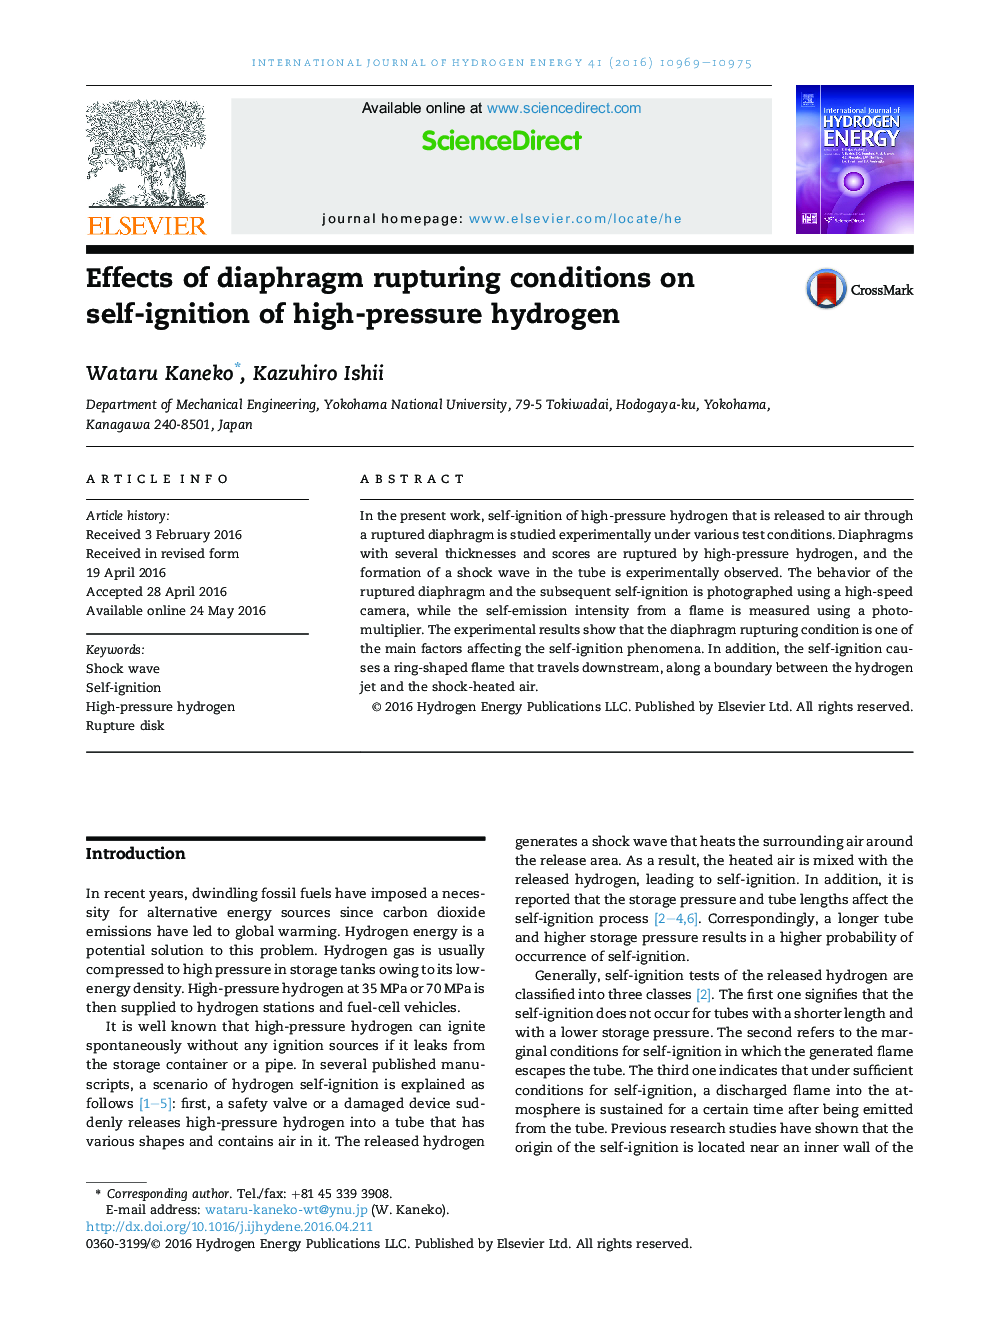 Effects of diaphragm rupturing conditions on self-ignition of high-pressure hydrogen